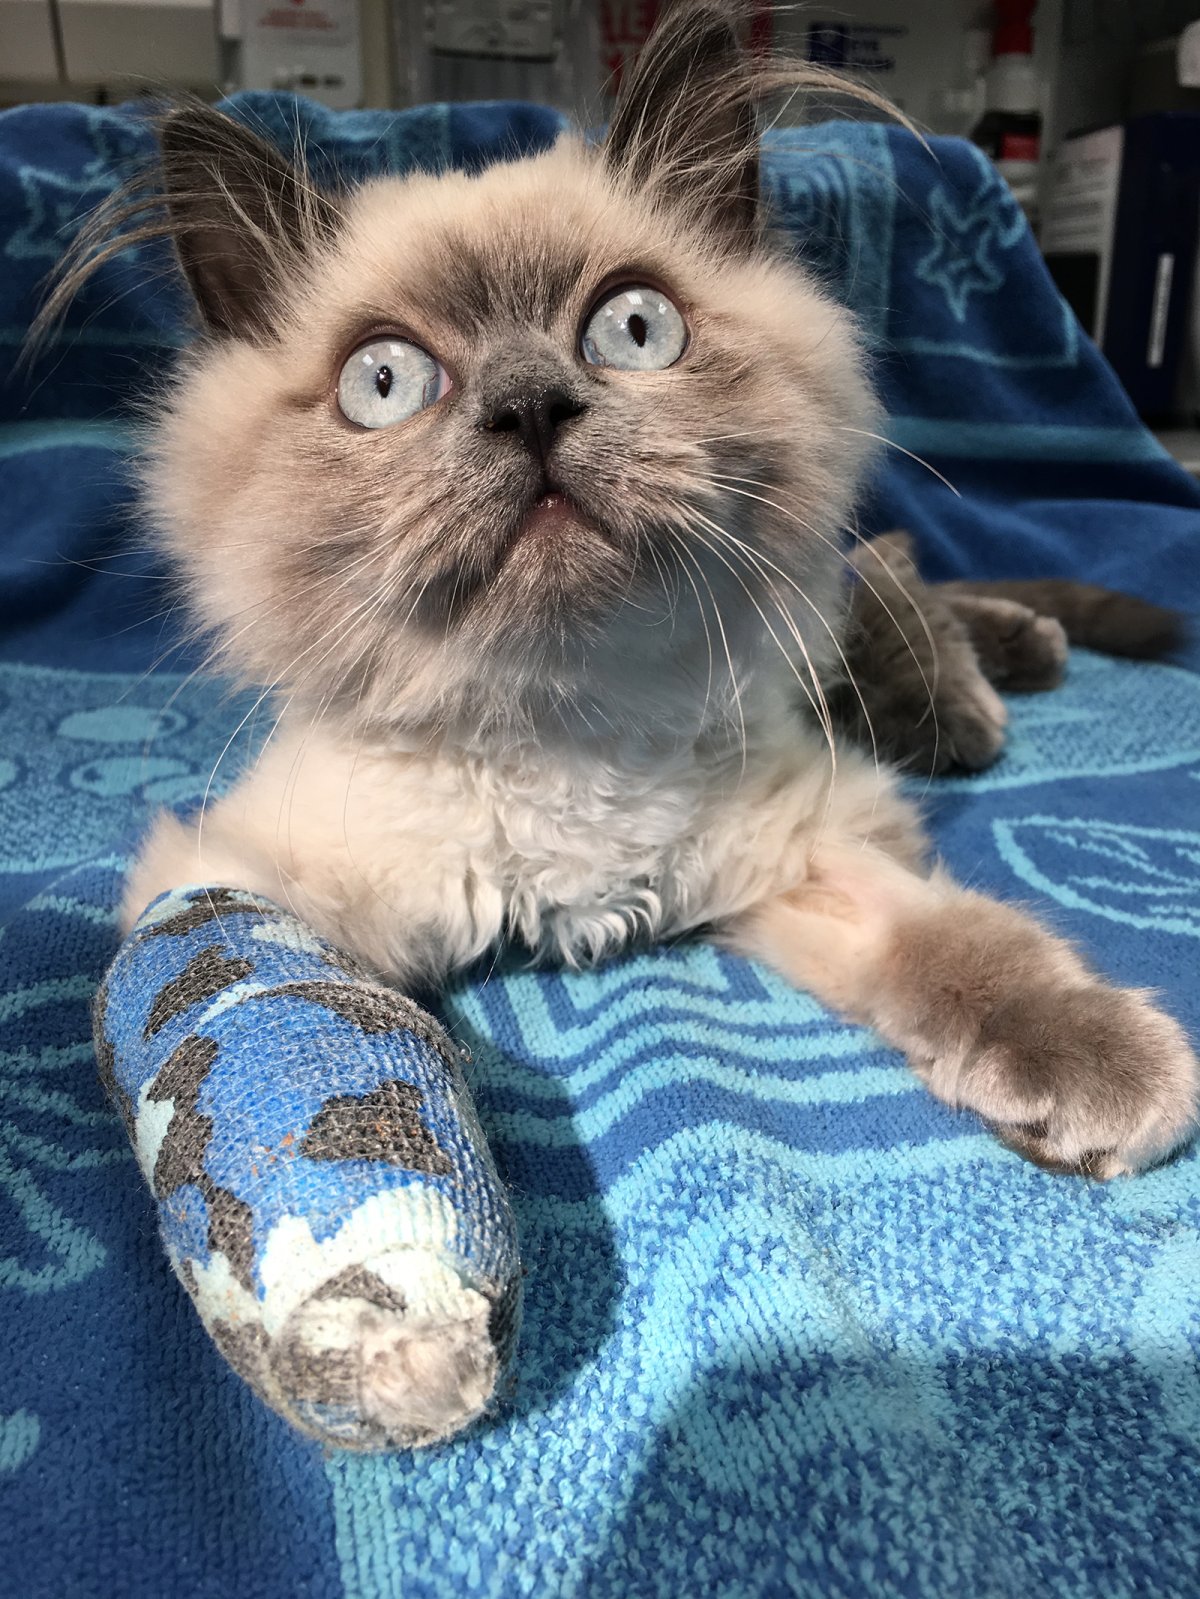 Cute kitten Roger Moore is now recovering after falling from an unknown number of floors recently.